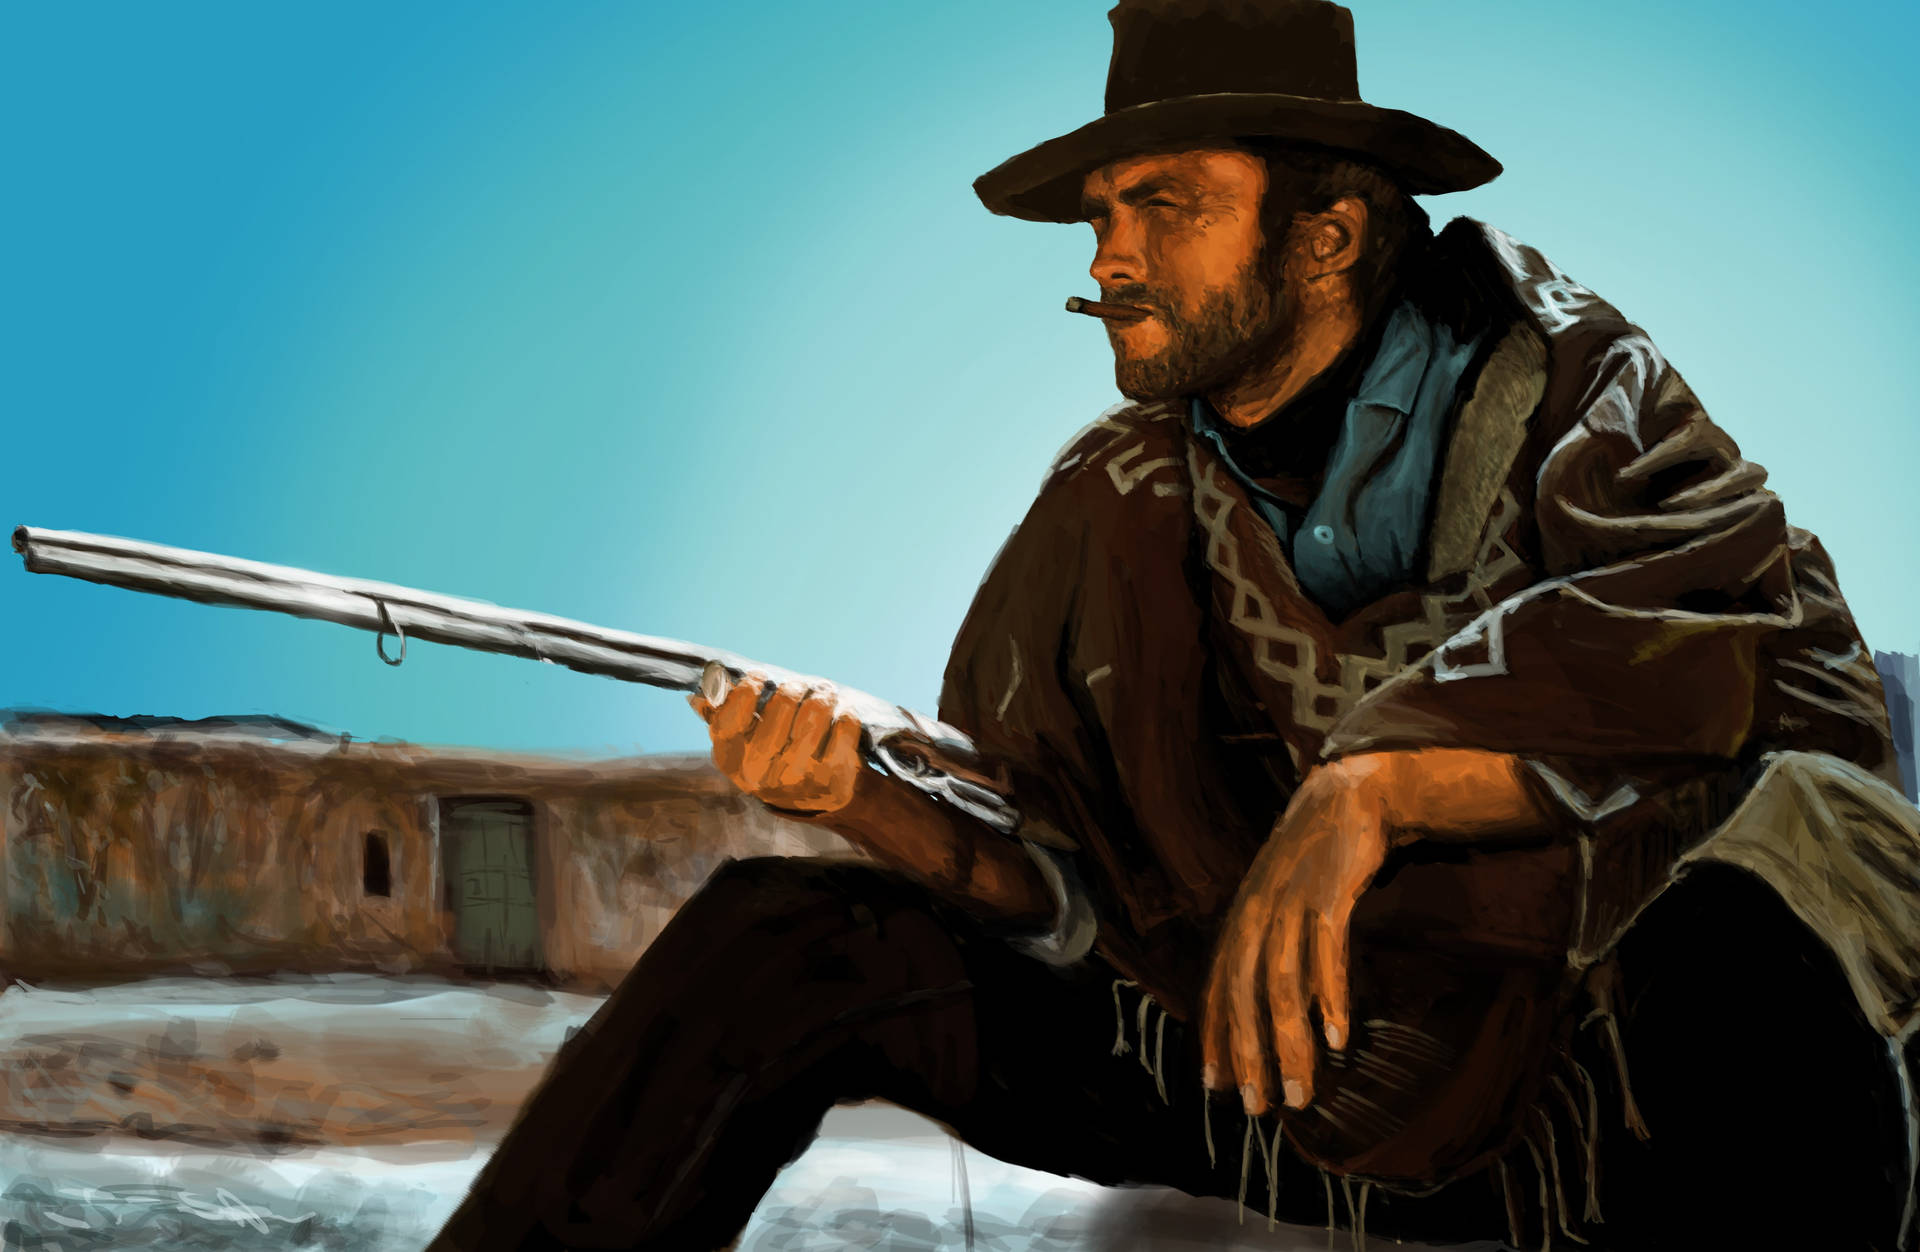 Download Clint Eastwood Fistful Of Dollars Winchester Wallpaper | Wallpapers .com